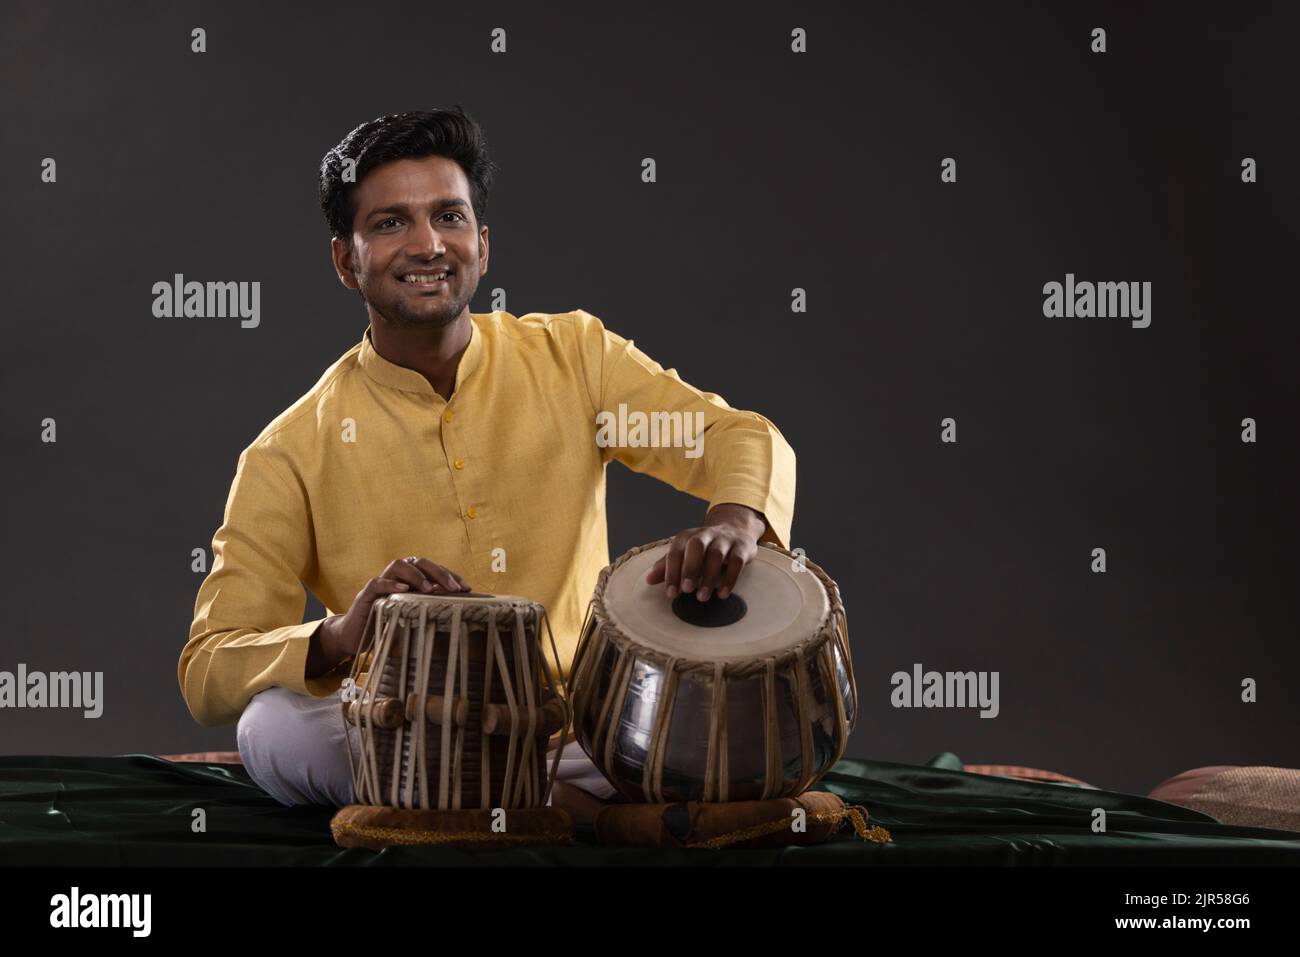 Portrait of cheering young man performing with Tabla on stage Stock Photo